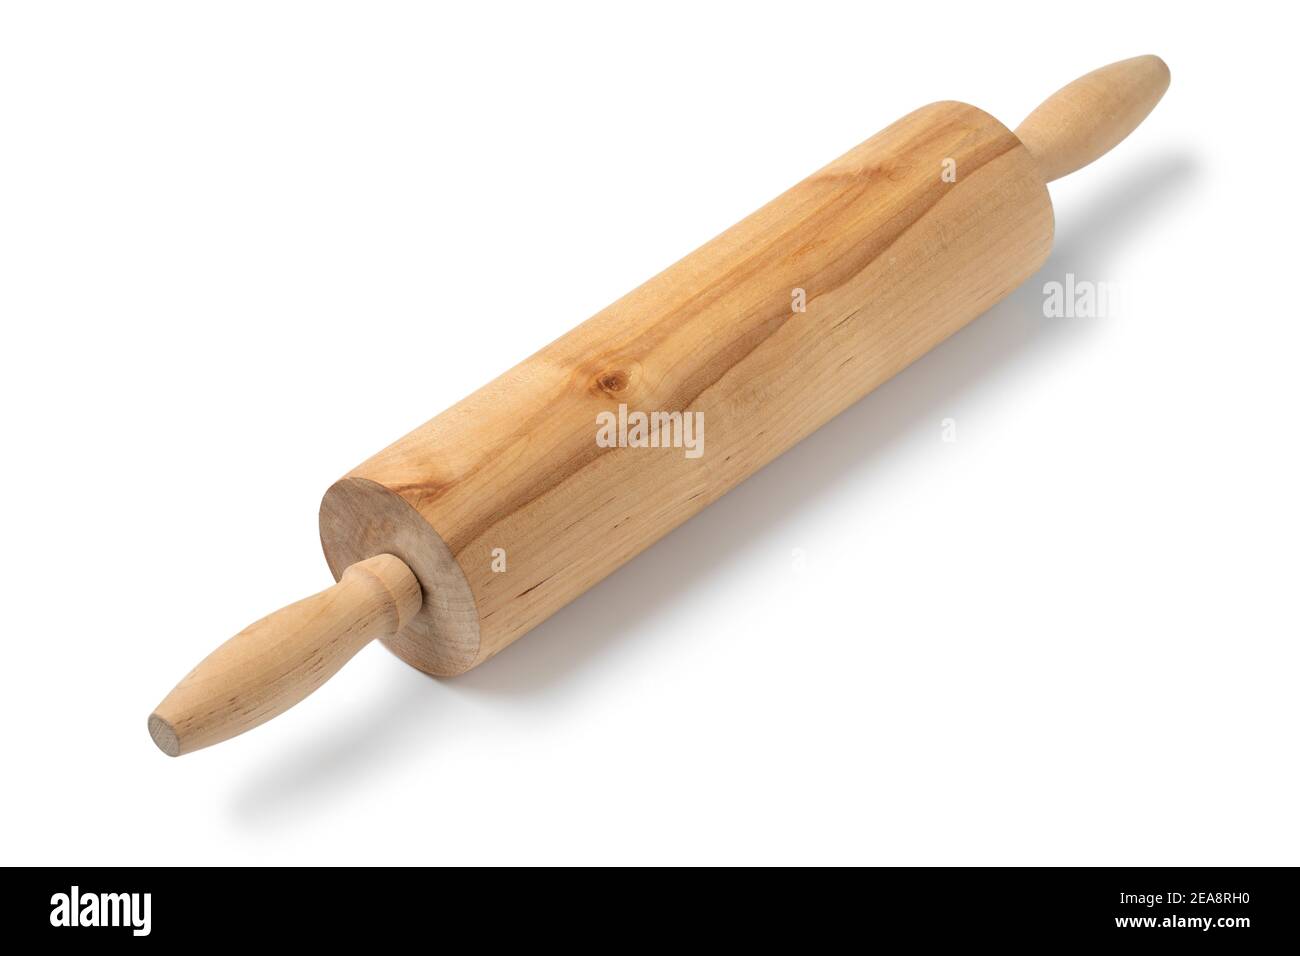 Single wooden rolling pin close up isolated on white background Stock Photo